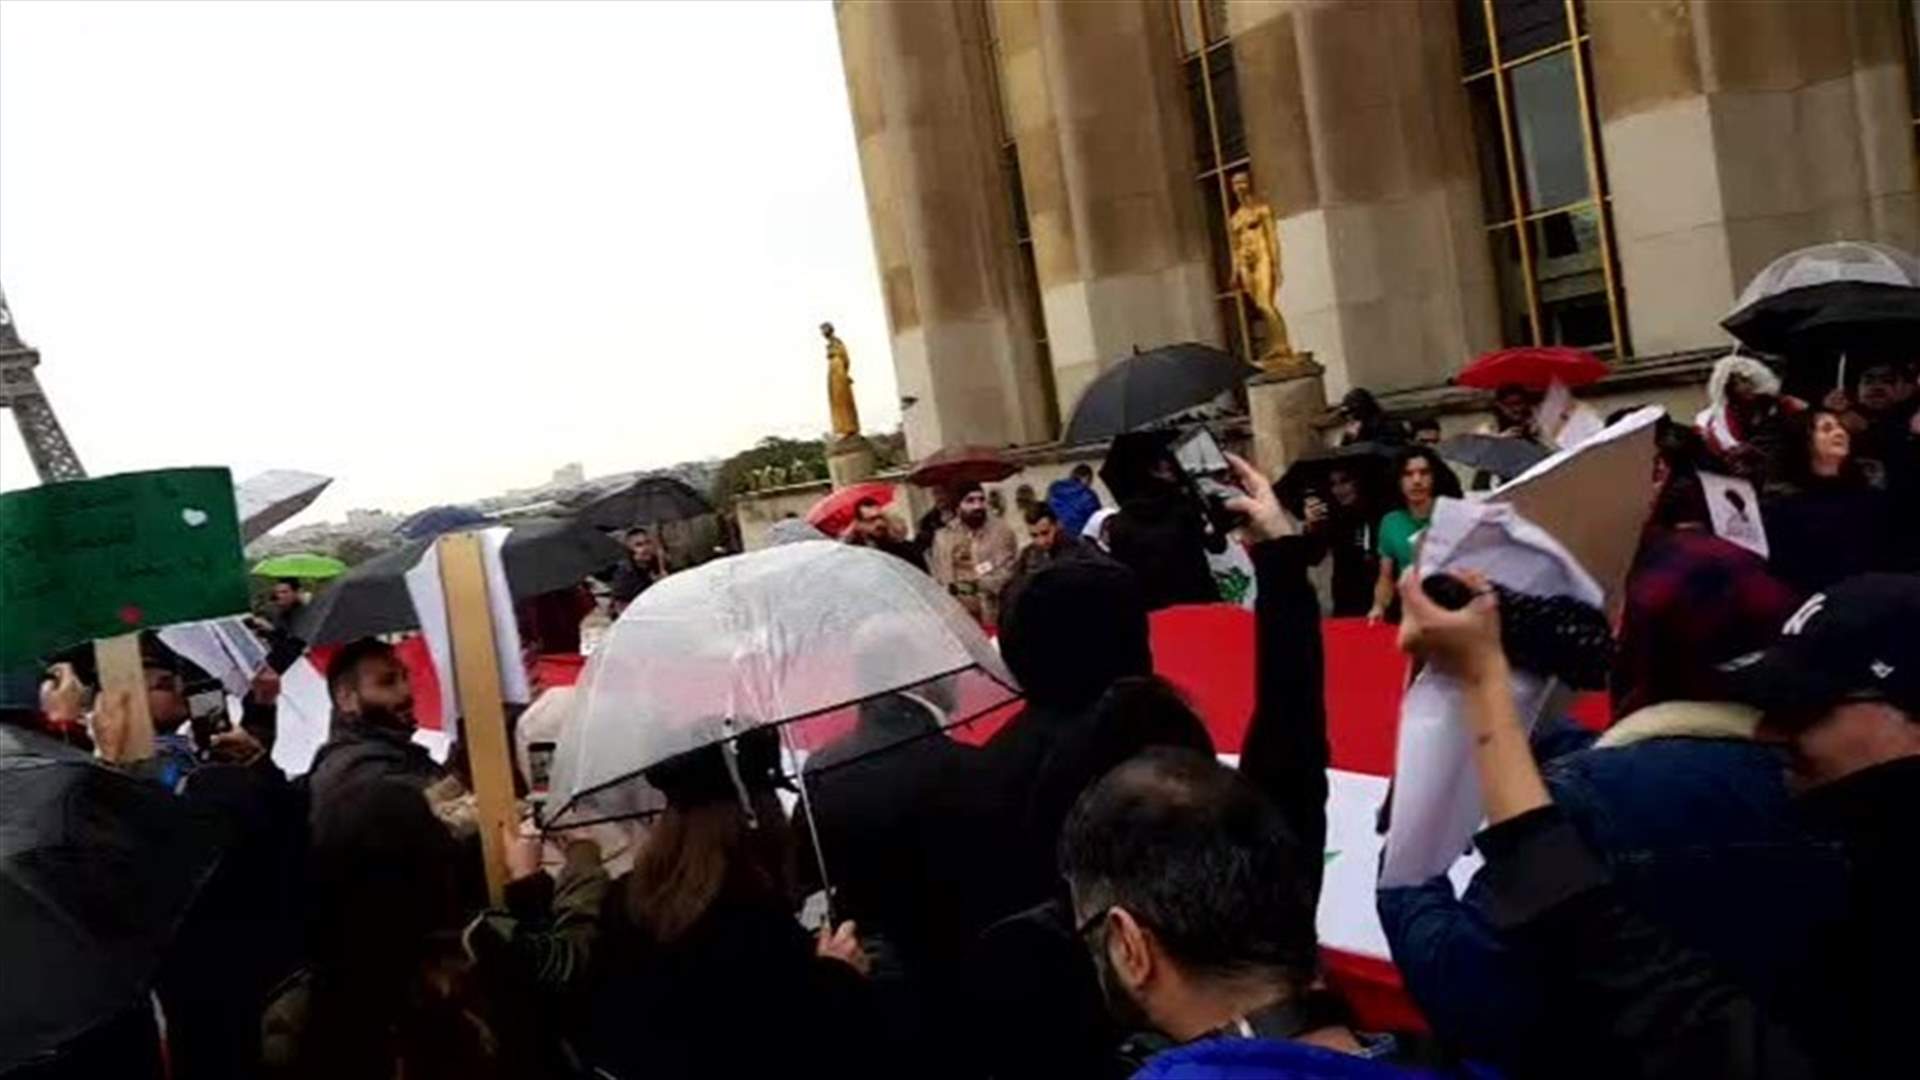 Lebanese expatriates in Paris stage sit-in under the rain in solidarity with Lebanon (Video)